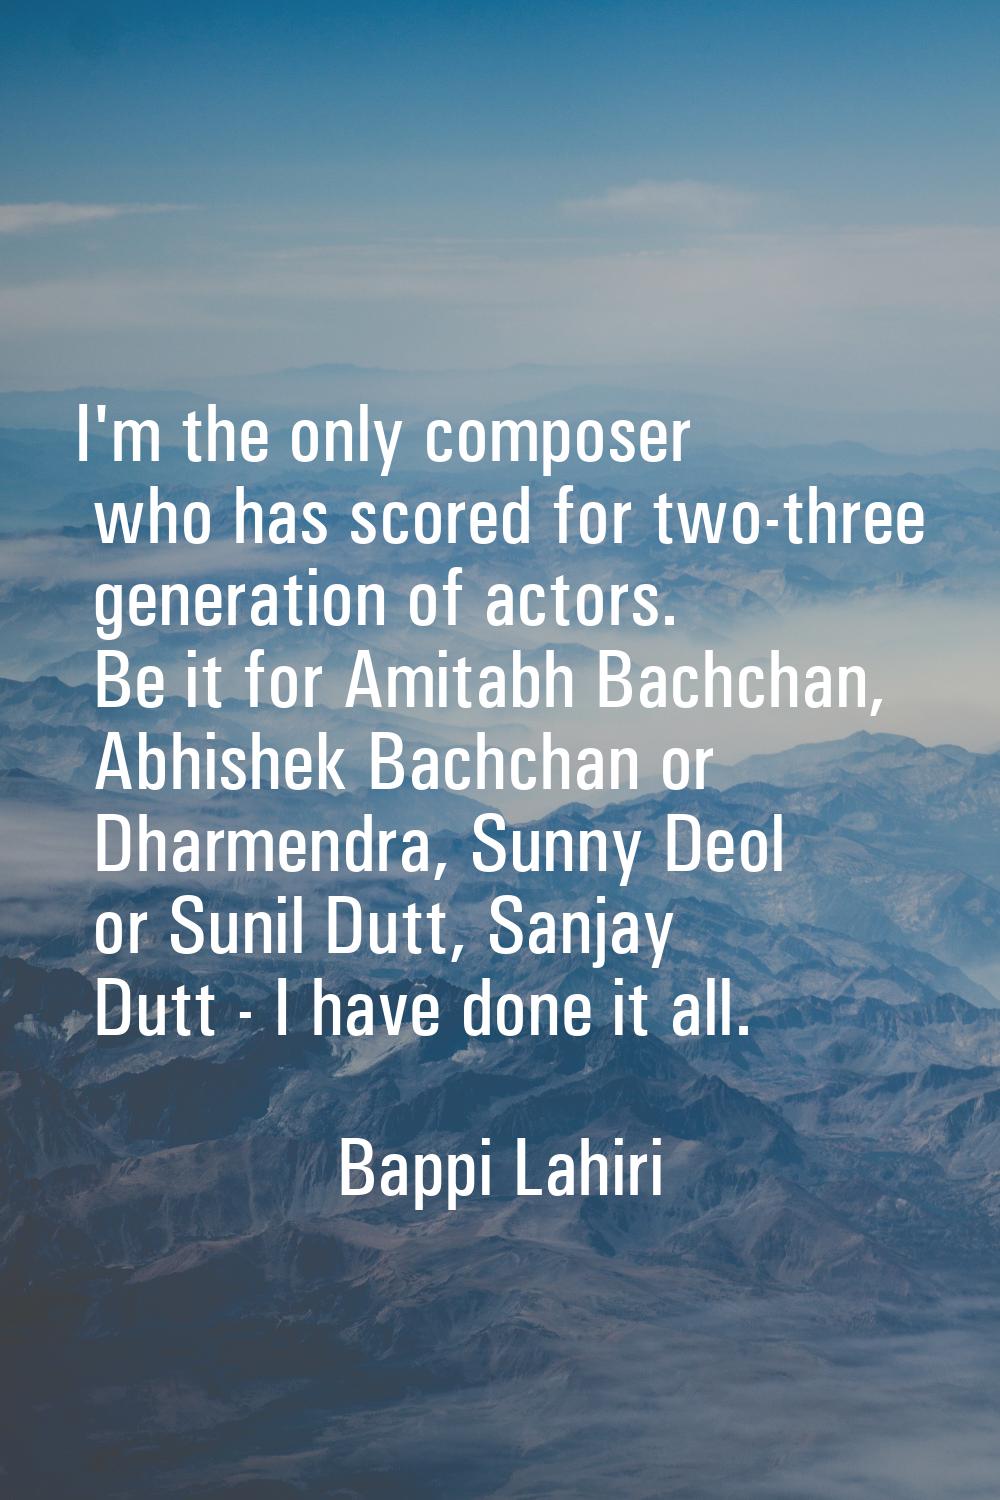 I'm the only composer who has scored for two-three generation of actors. Be it for Amitabh Bachchan